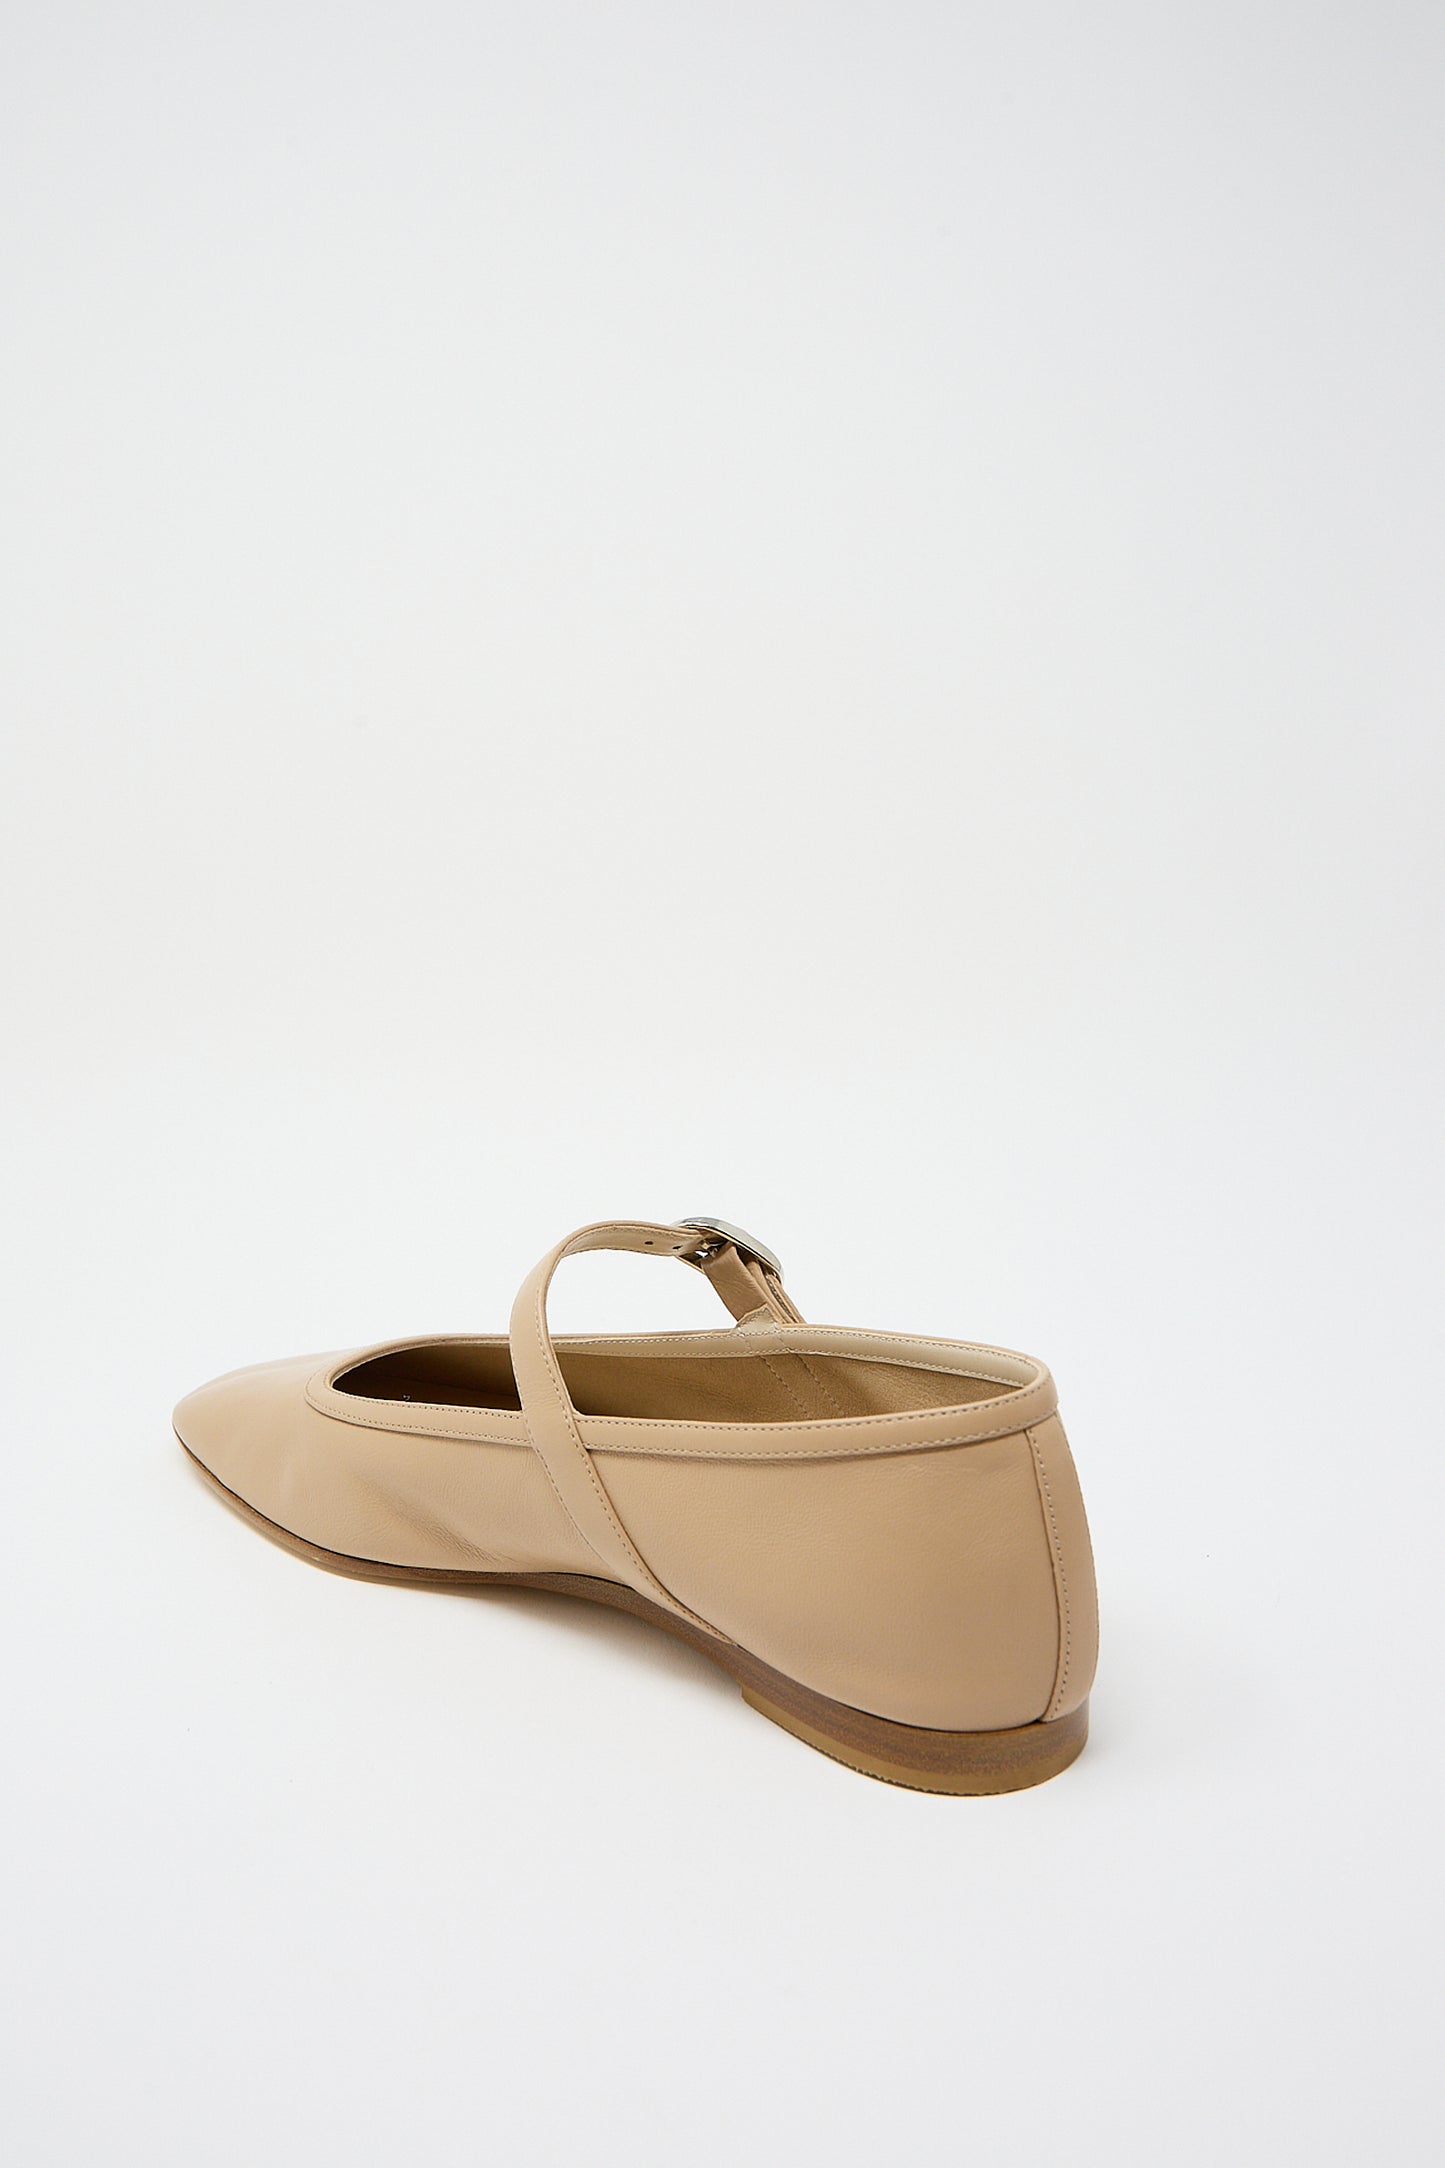 Beige Leather Ballet Mary Jane with leather piping on a white background by Le Monde Beryl.